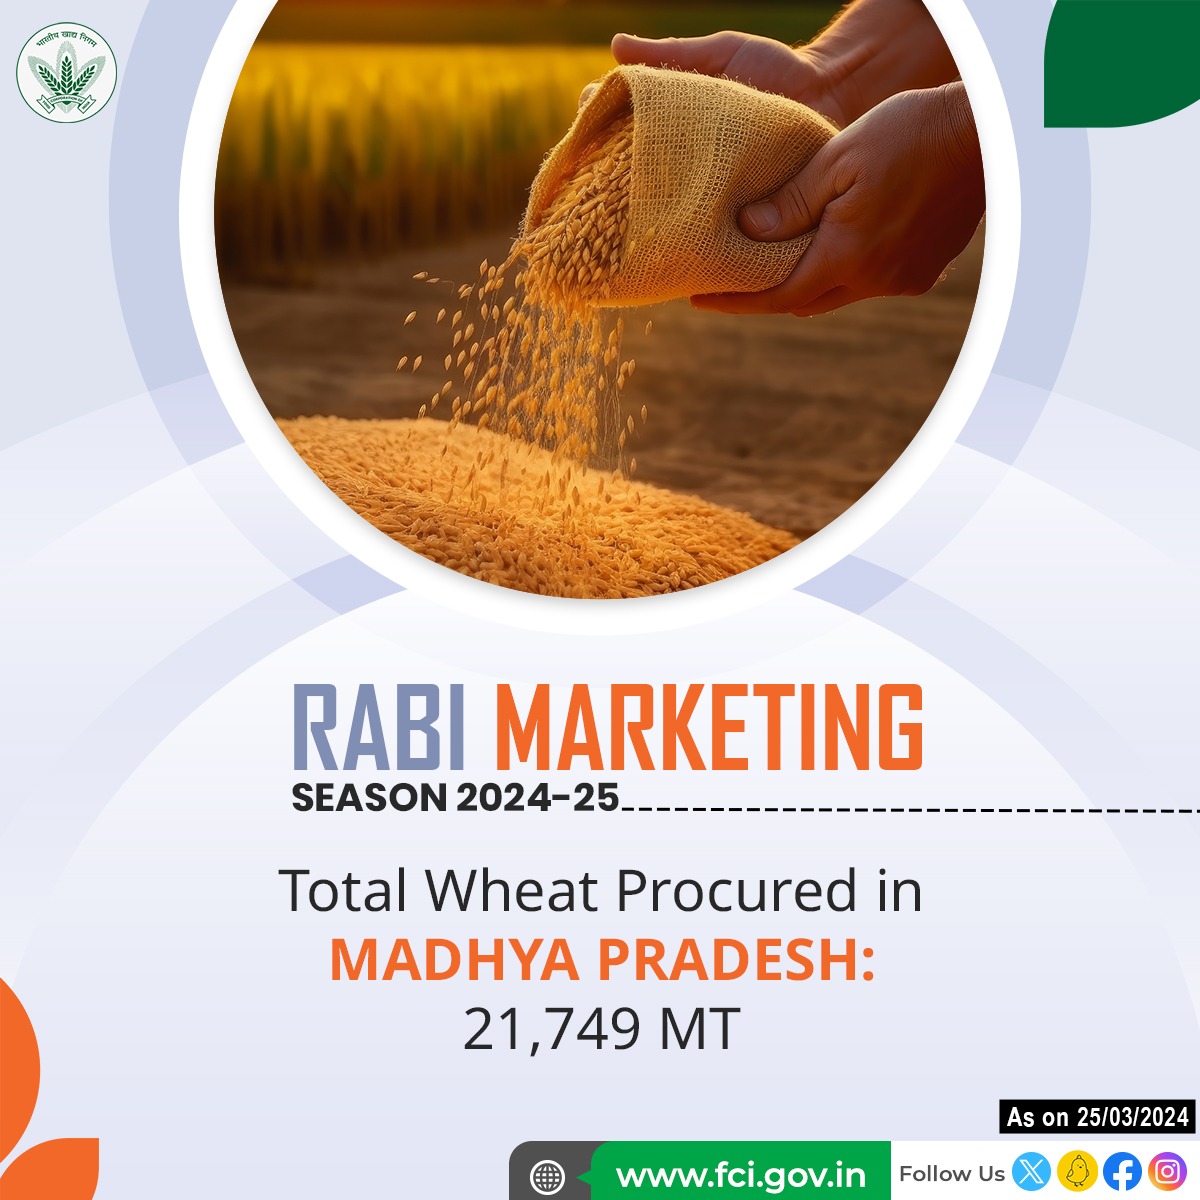 FCI along with State Agencies procured 21,749 MT Wheat in Madhya Pradesh during RMS 2024-25 from farmers and money has been directly credited into their bank accounts.